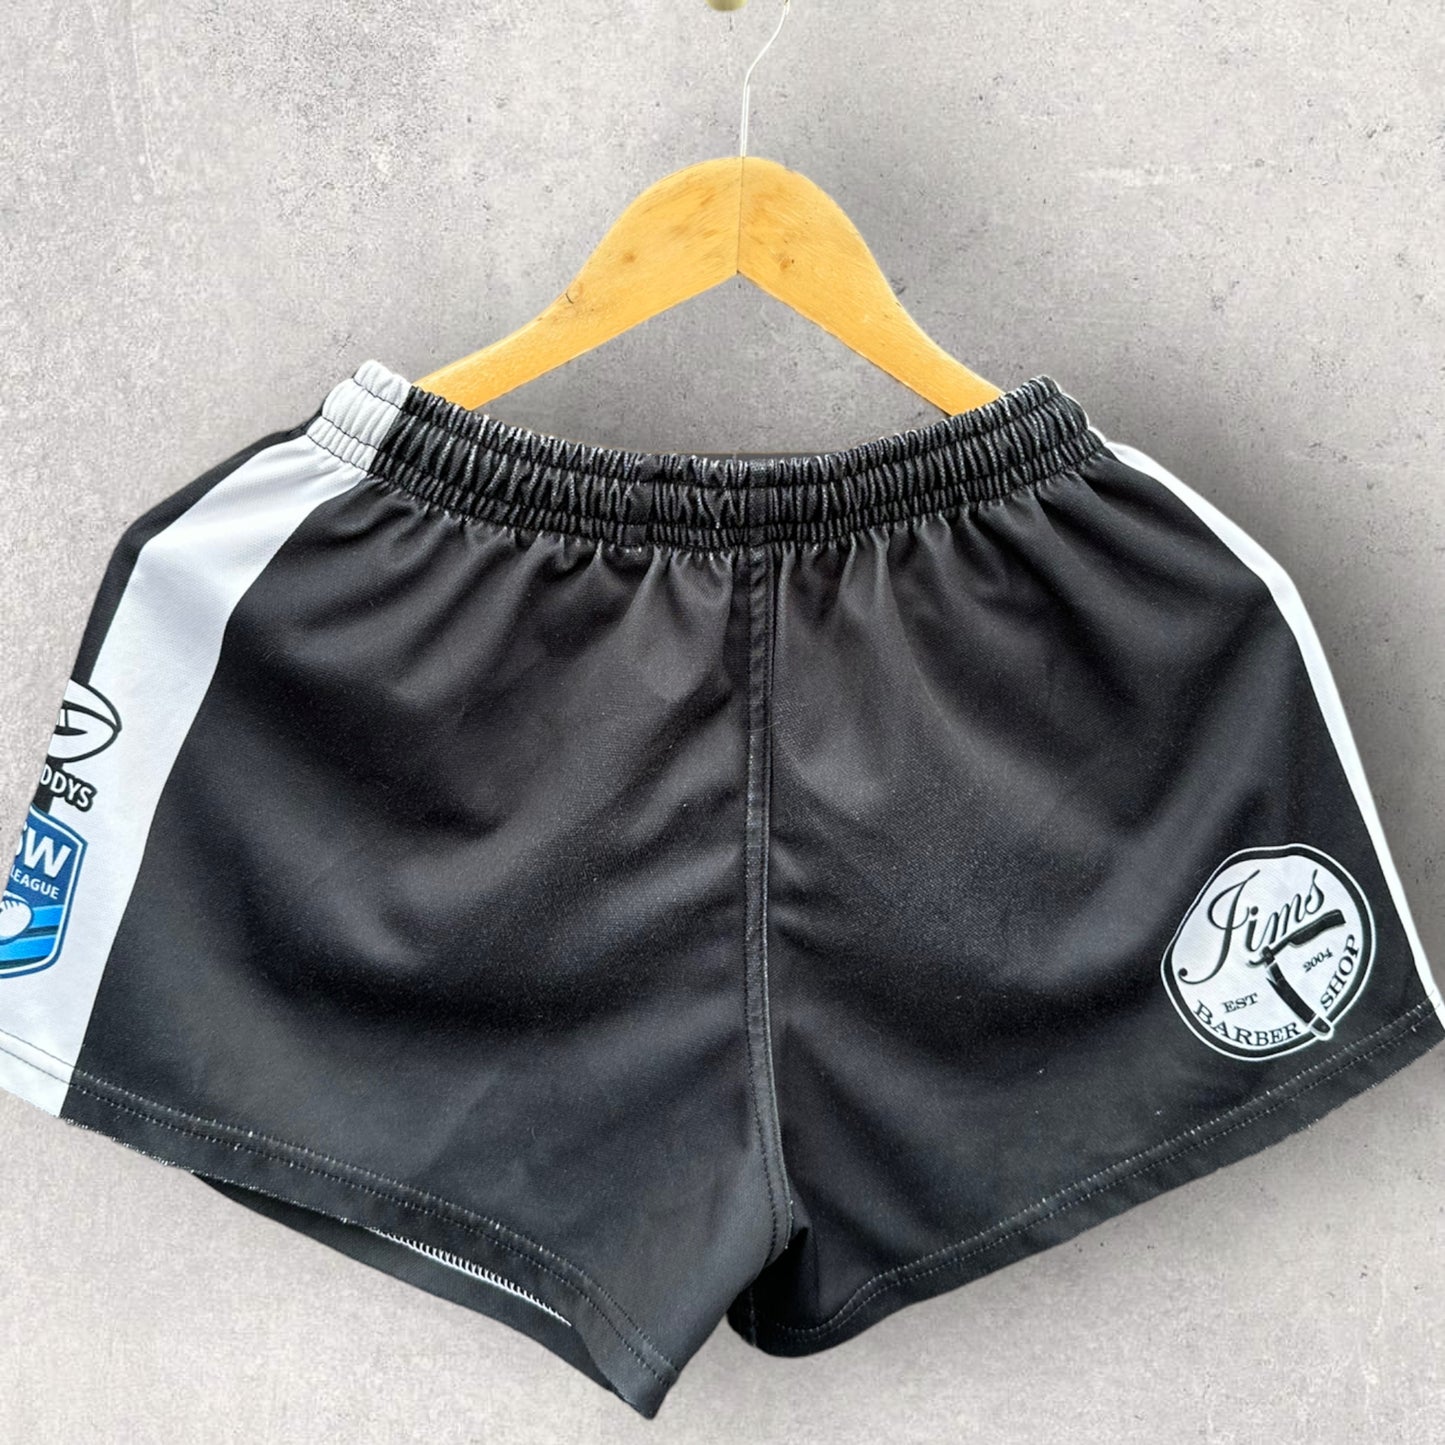 PICTON MAGPIES MATCH SHORTS